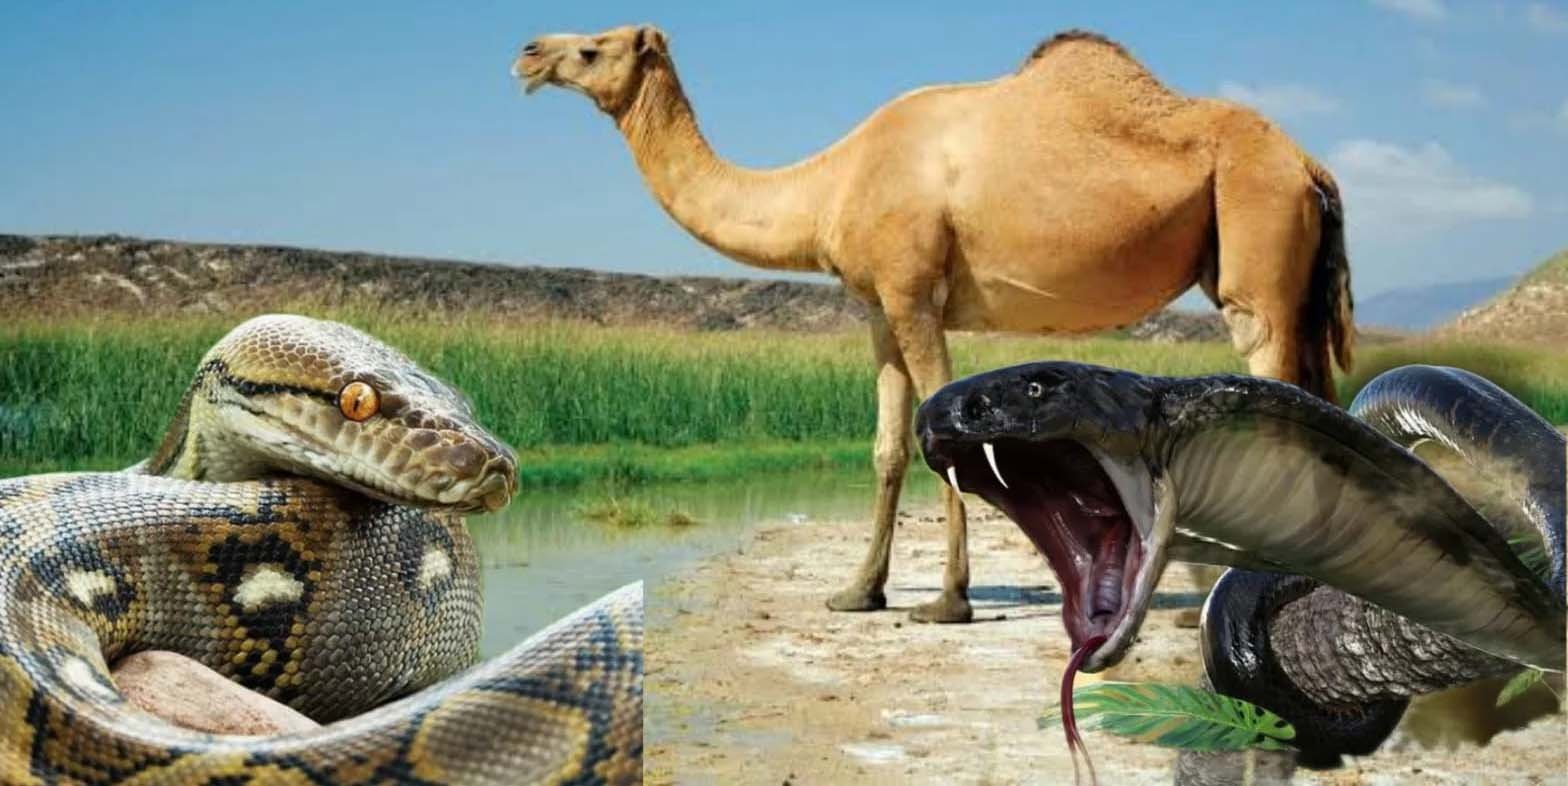 Camel has eaten Cobra. Here, instead of cumin, Saanp is kept in the camel's mouth.